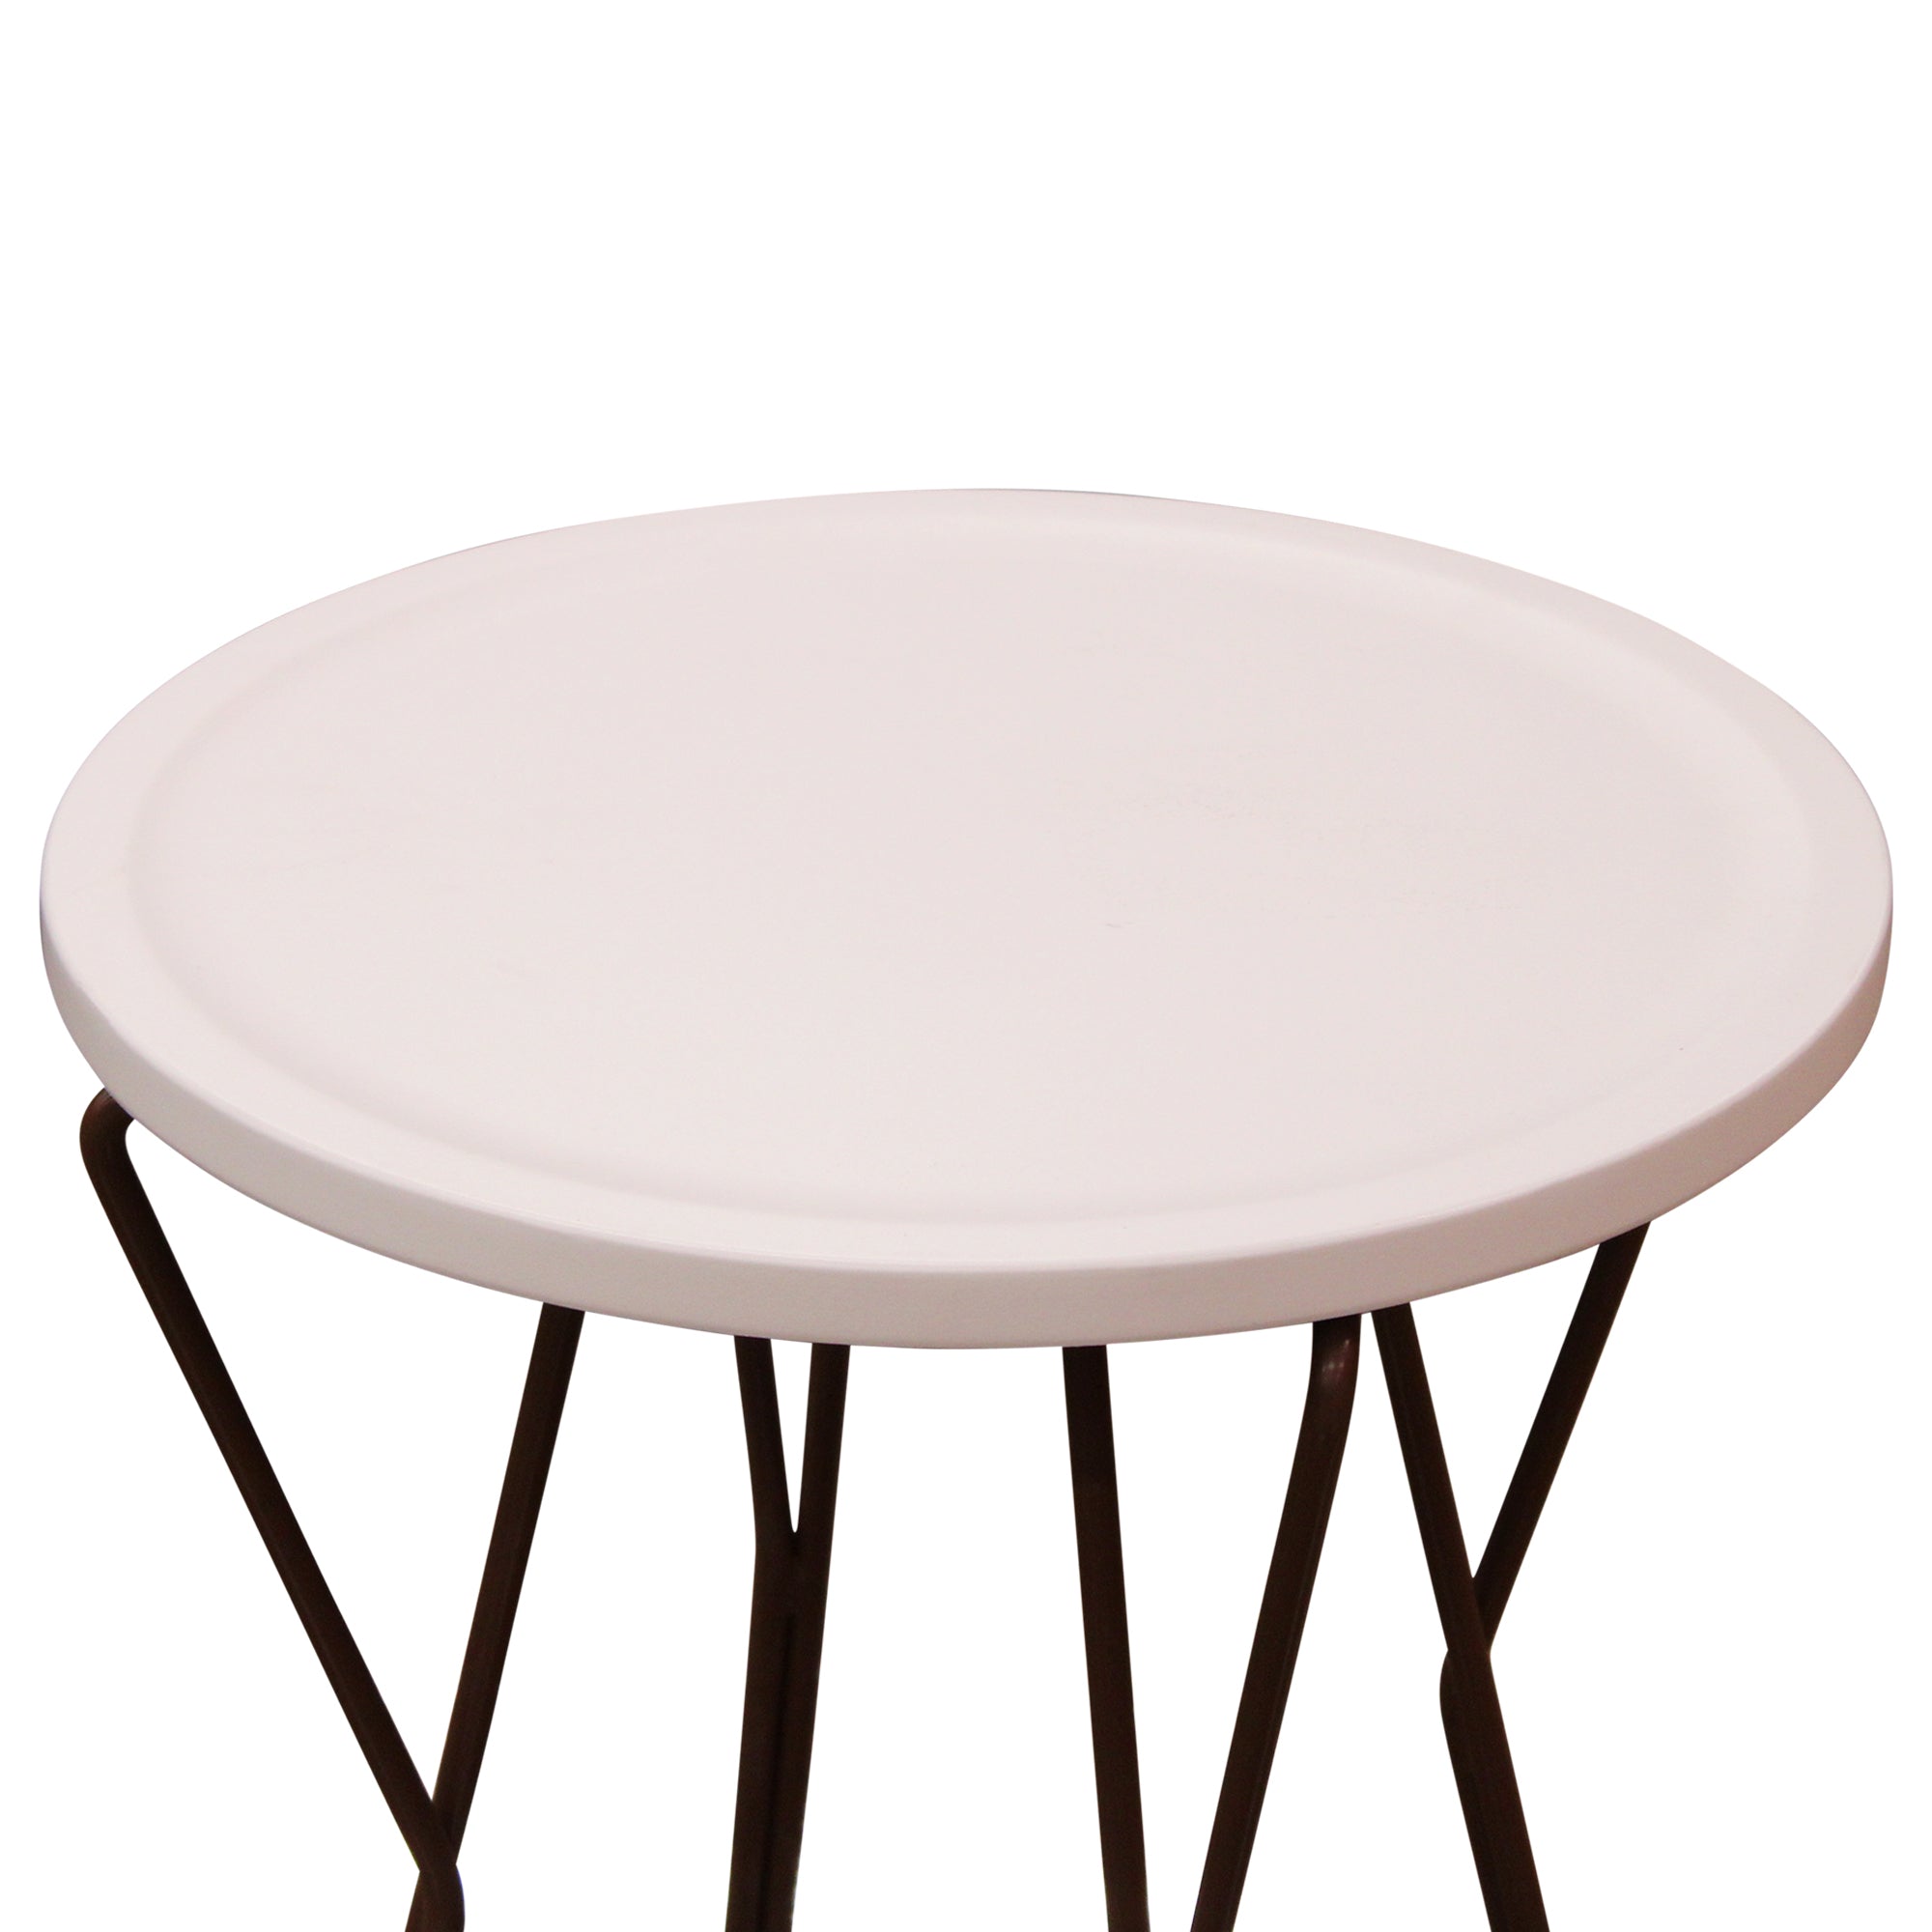 OFS Wyre Side Table, White - Preowned